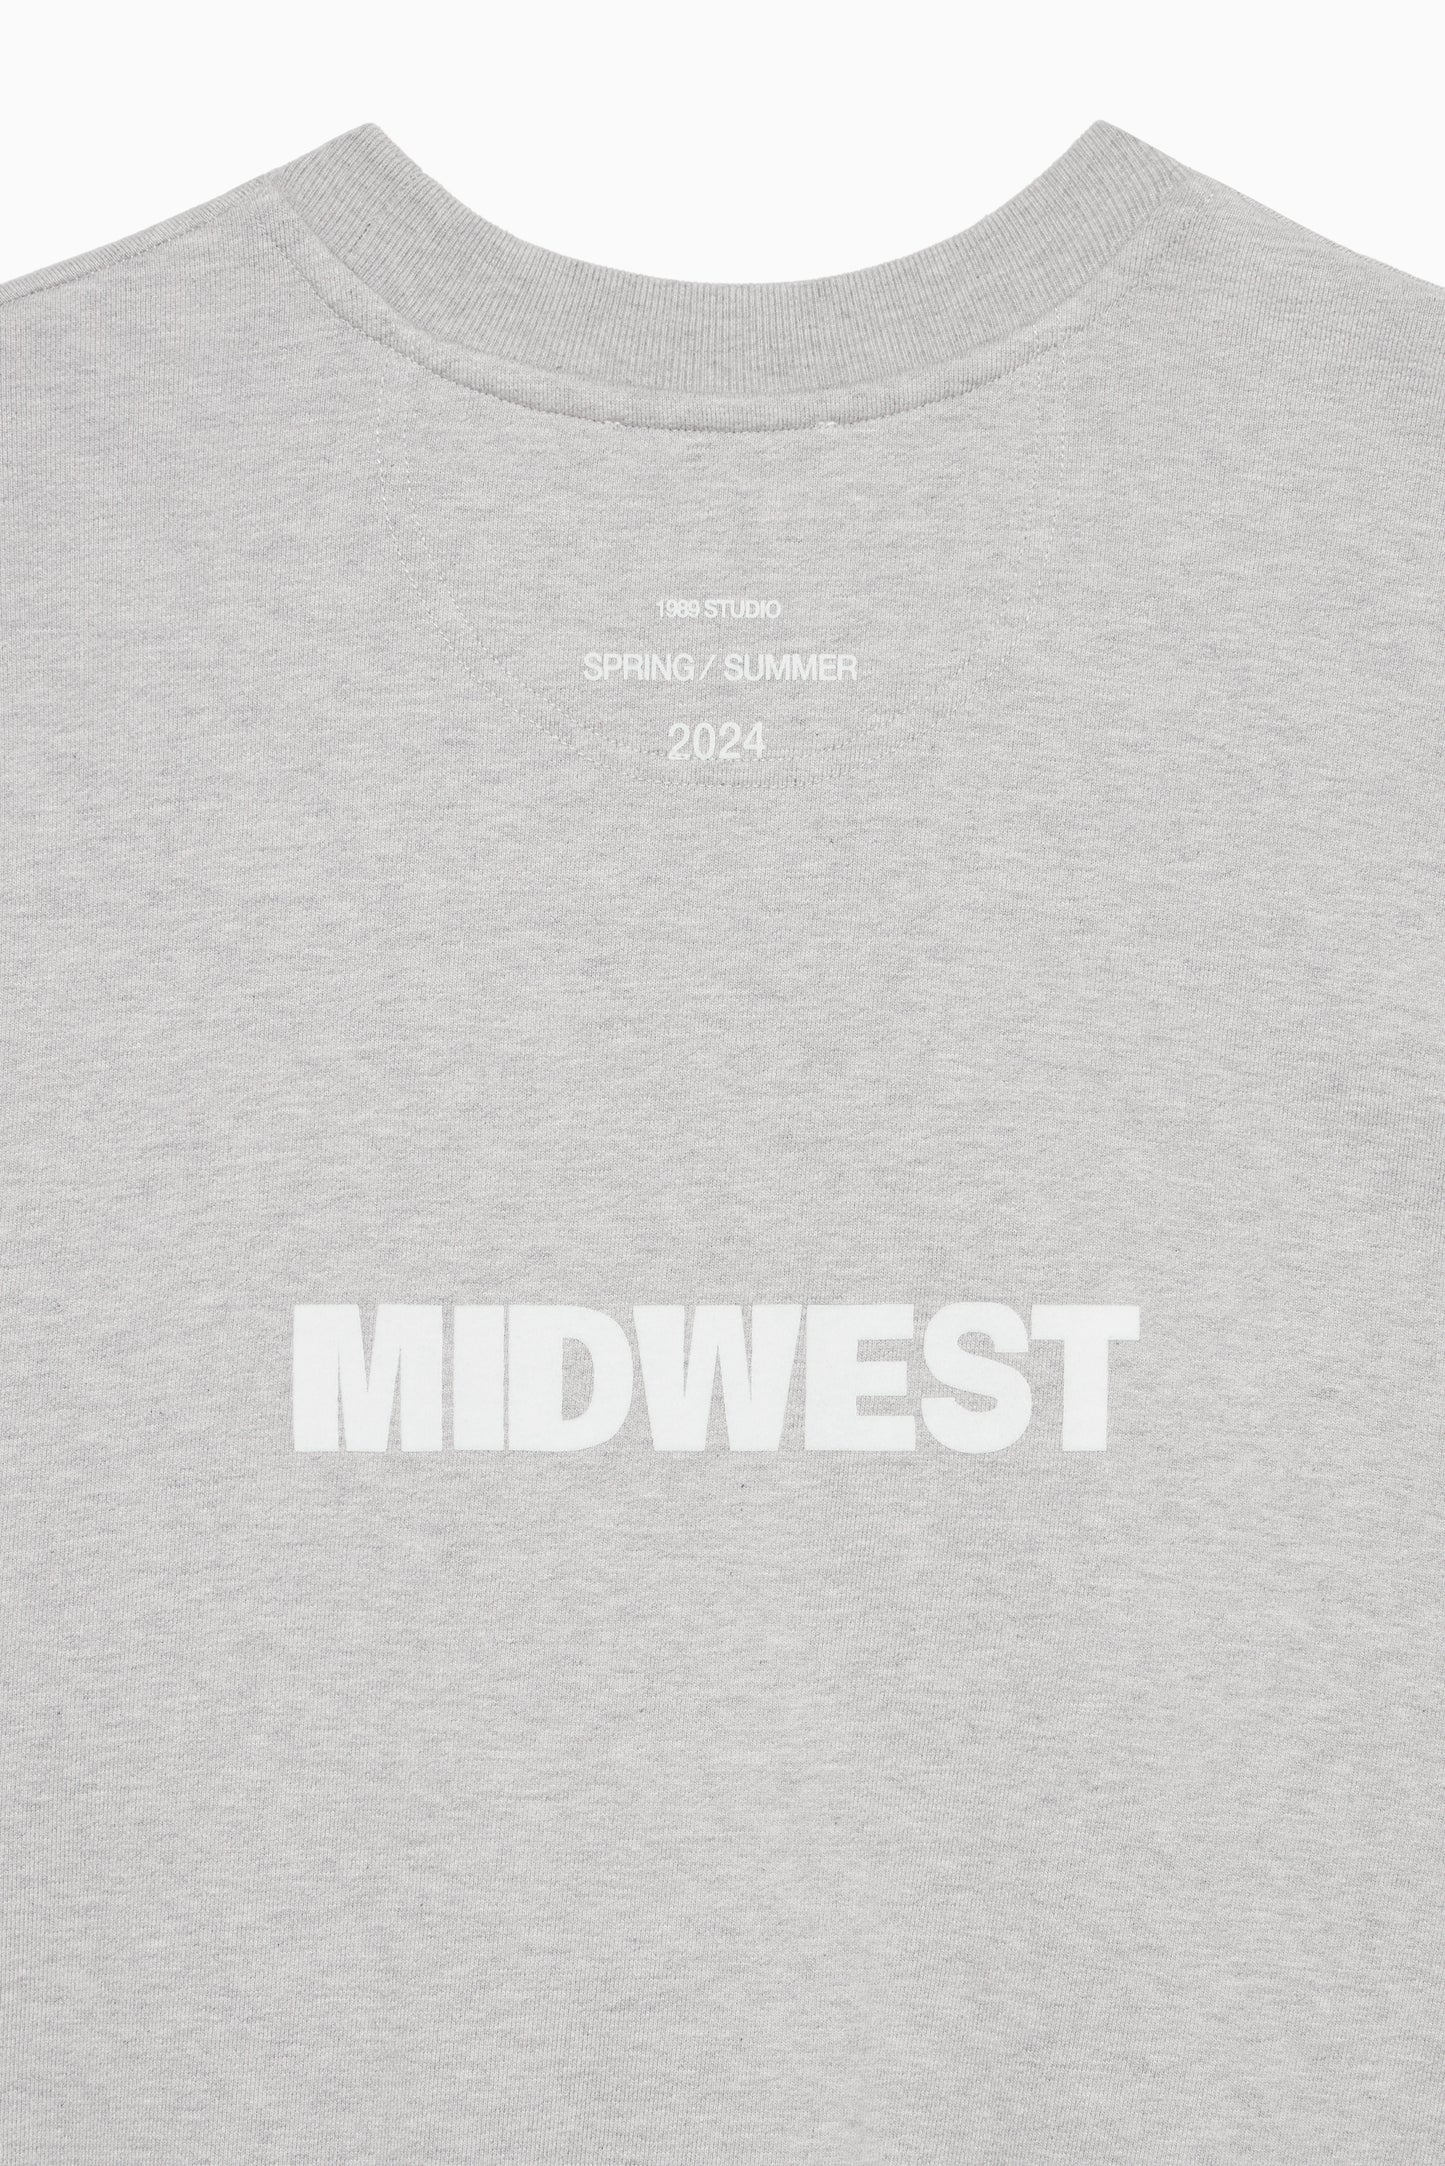 Man's Midwest Relaxed Sweatshirt